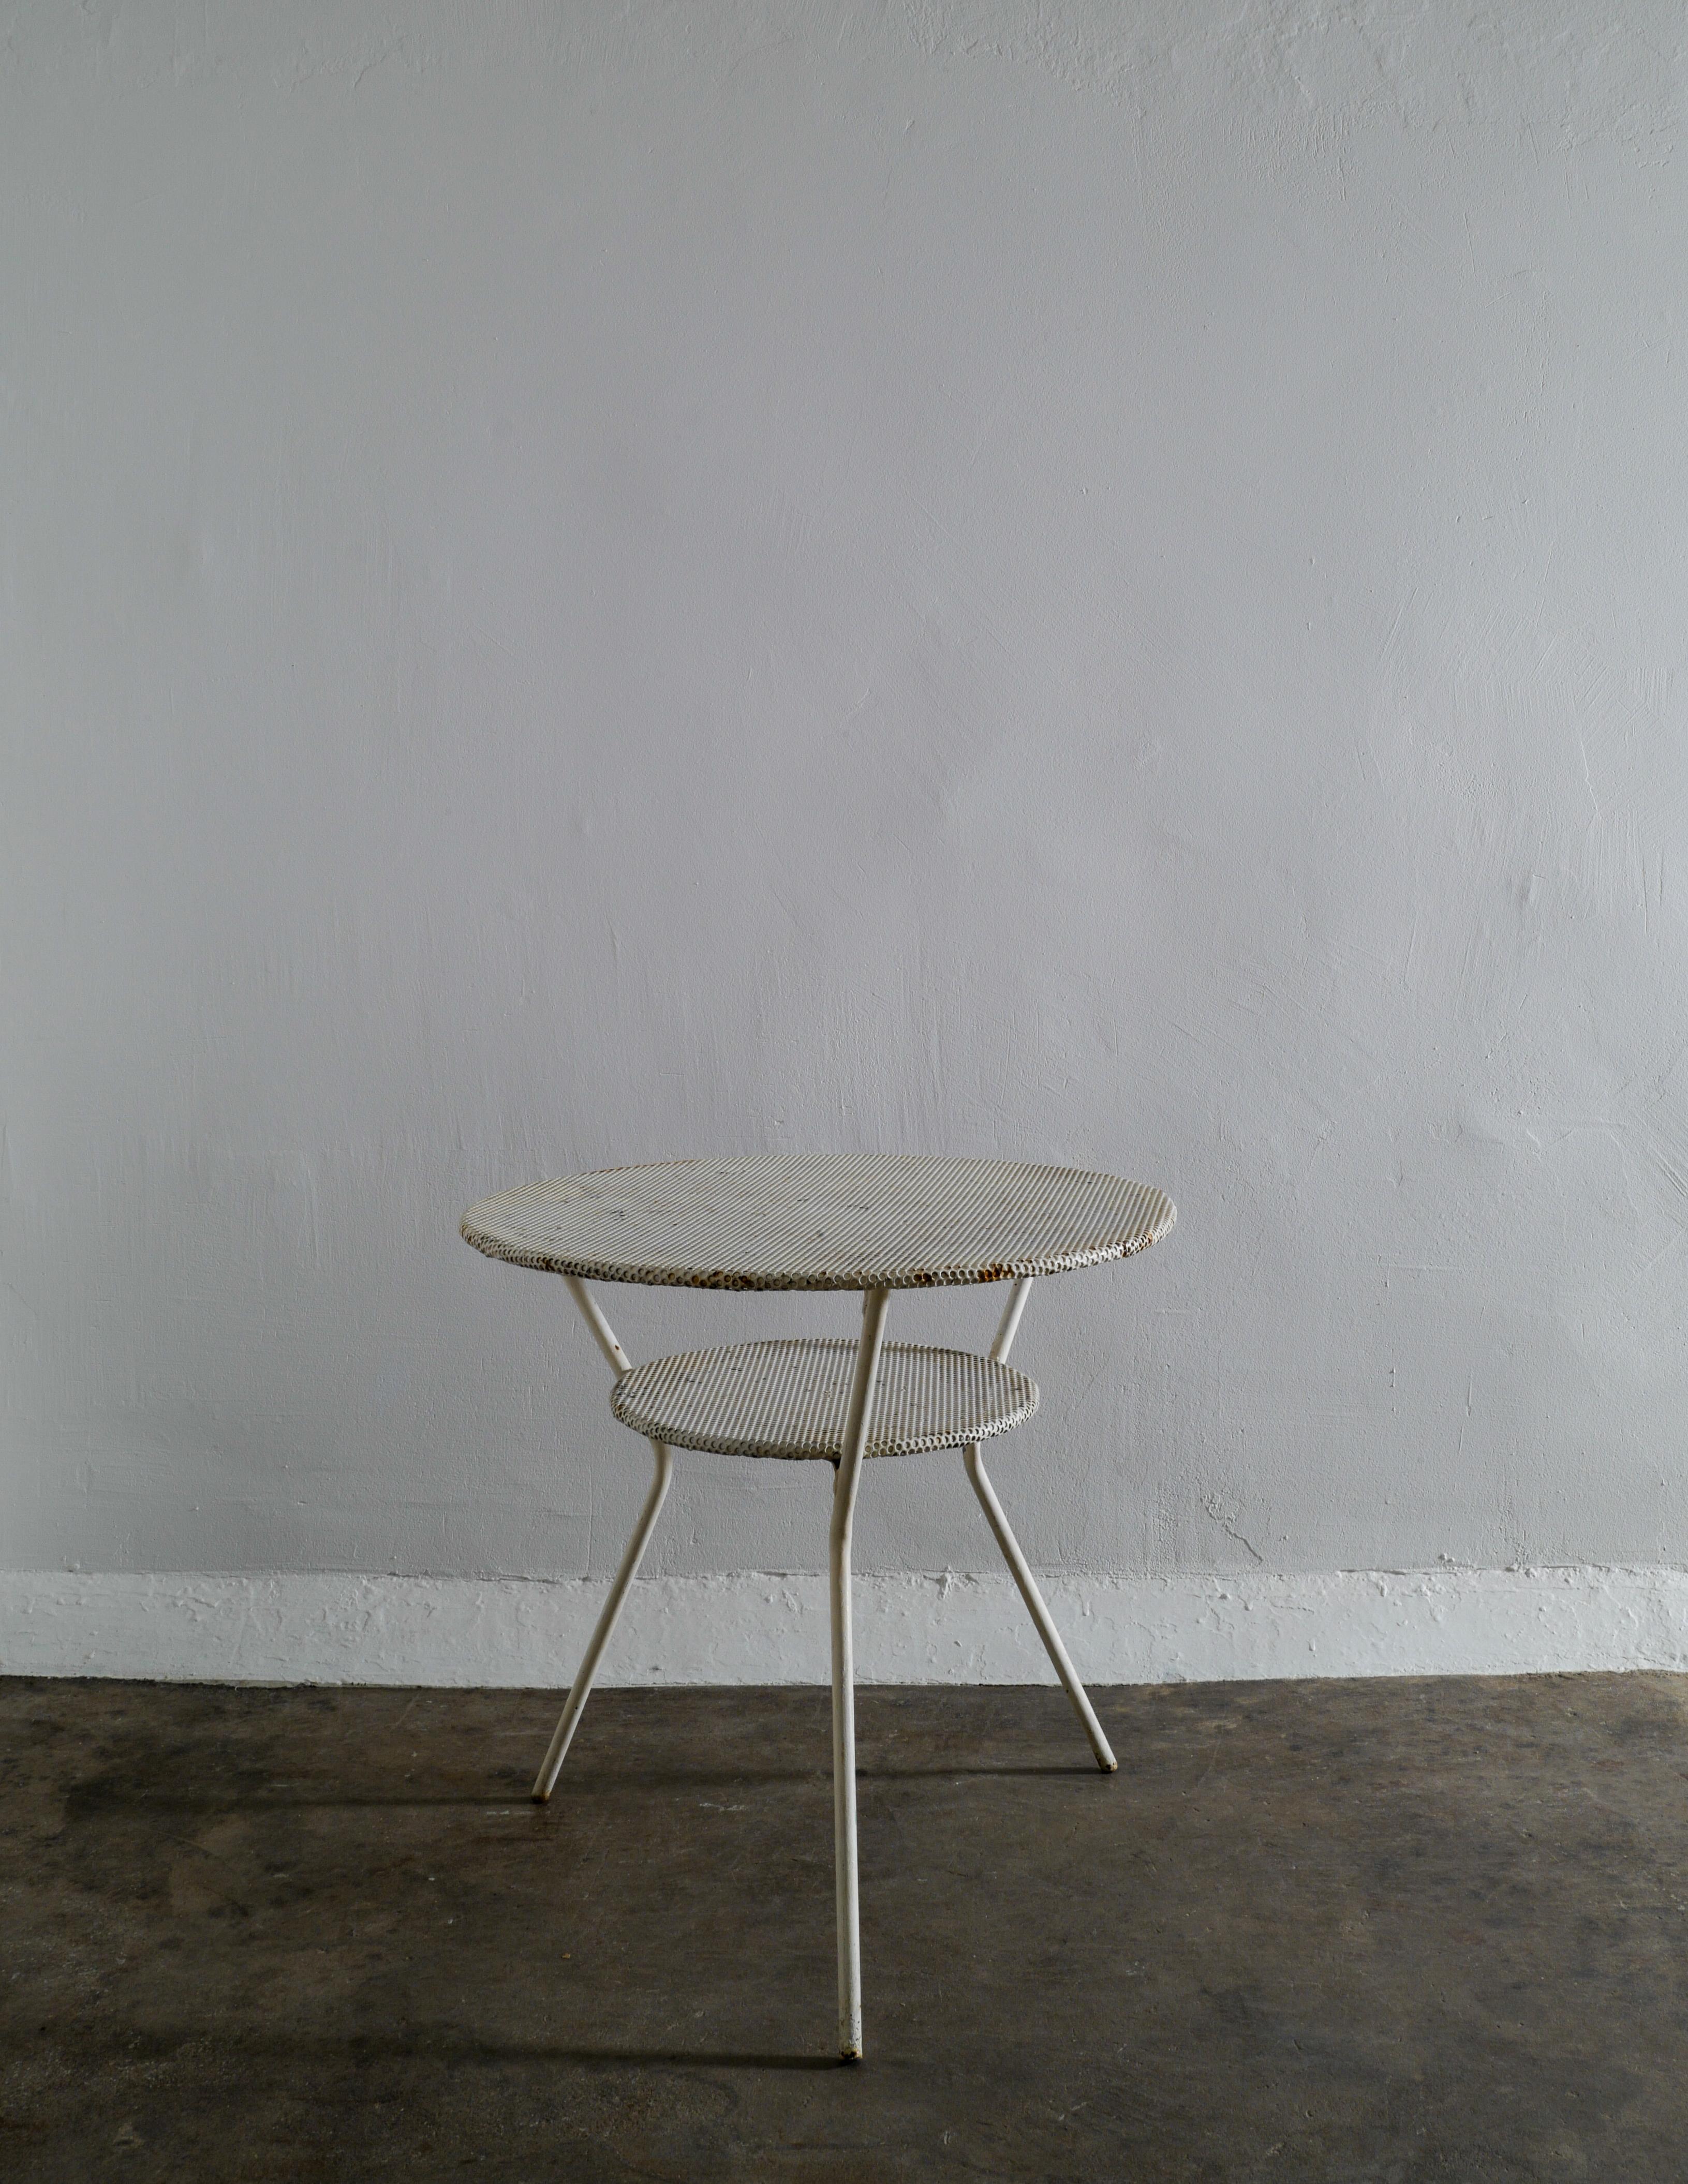 Rare café and side table in style of Mathieu Matégot produced in France during the 1950s. In good vintage condition and showing beautiful patina from age and use. Stable and good to use. Perfect for your garden or home.